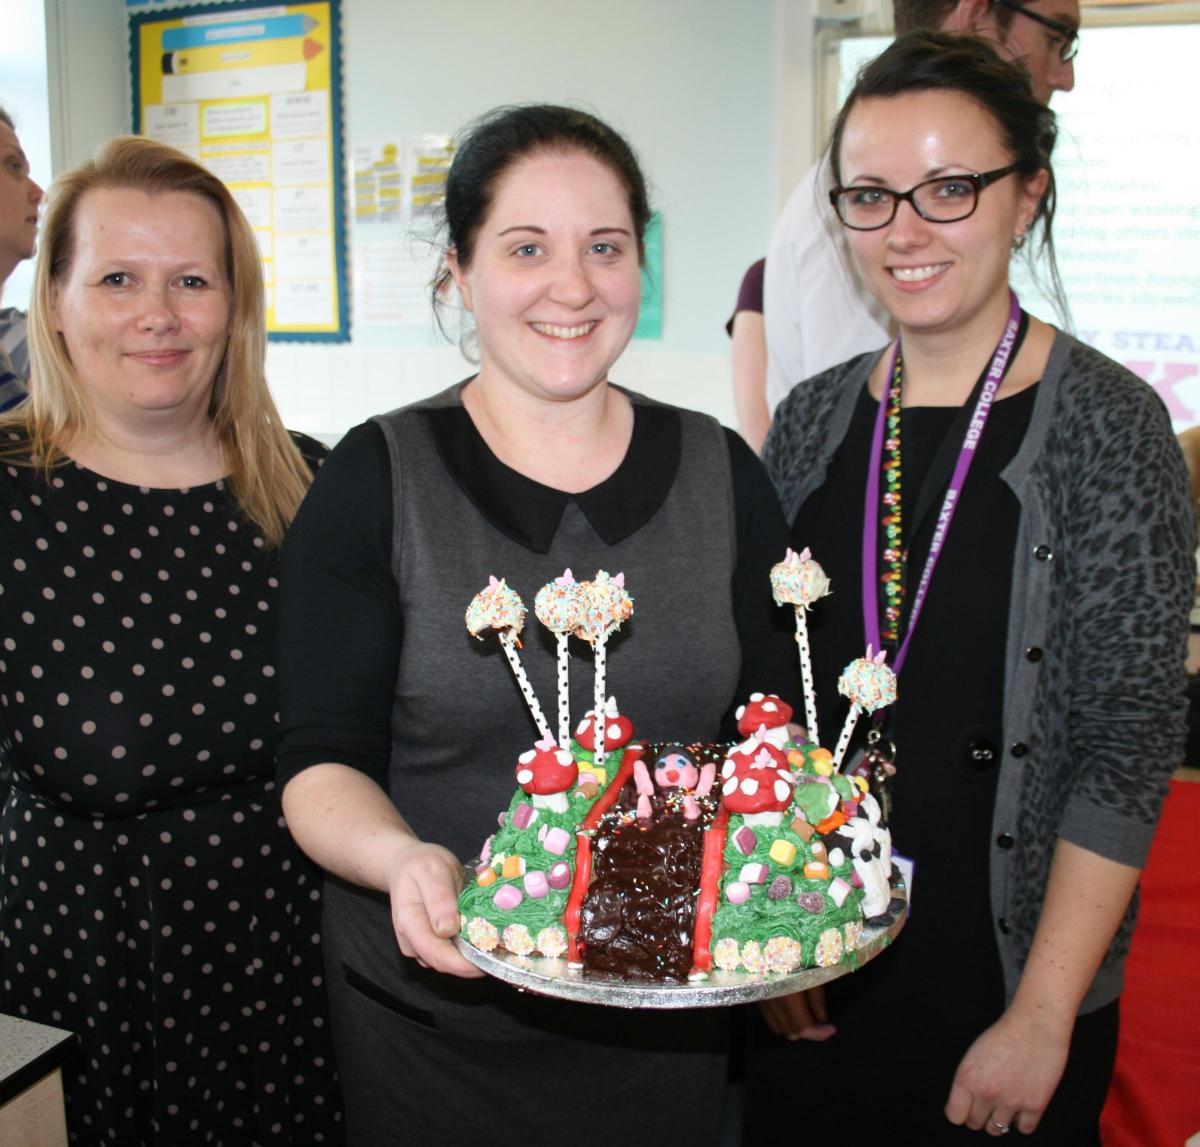 The Humanities department at Baxter College won the creative challenge for the Sport Relief 'Baxter Bake Off'